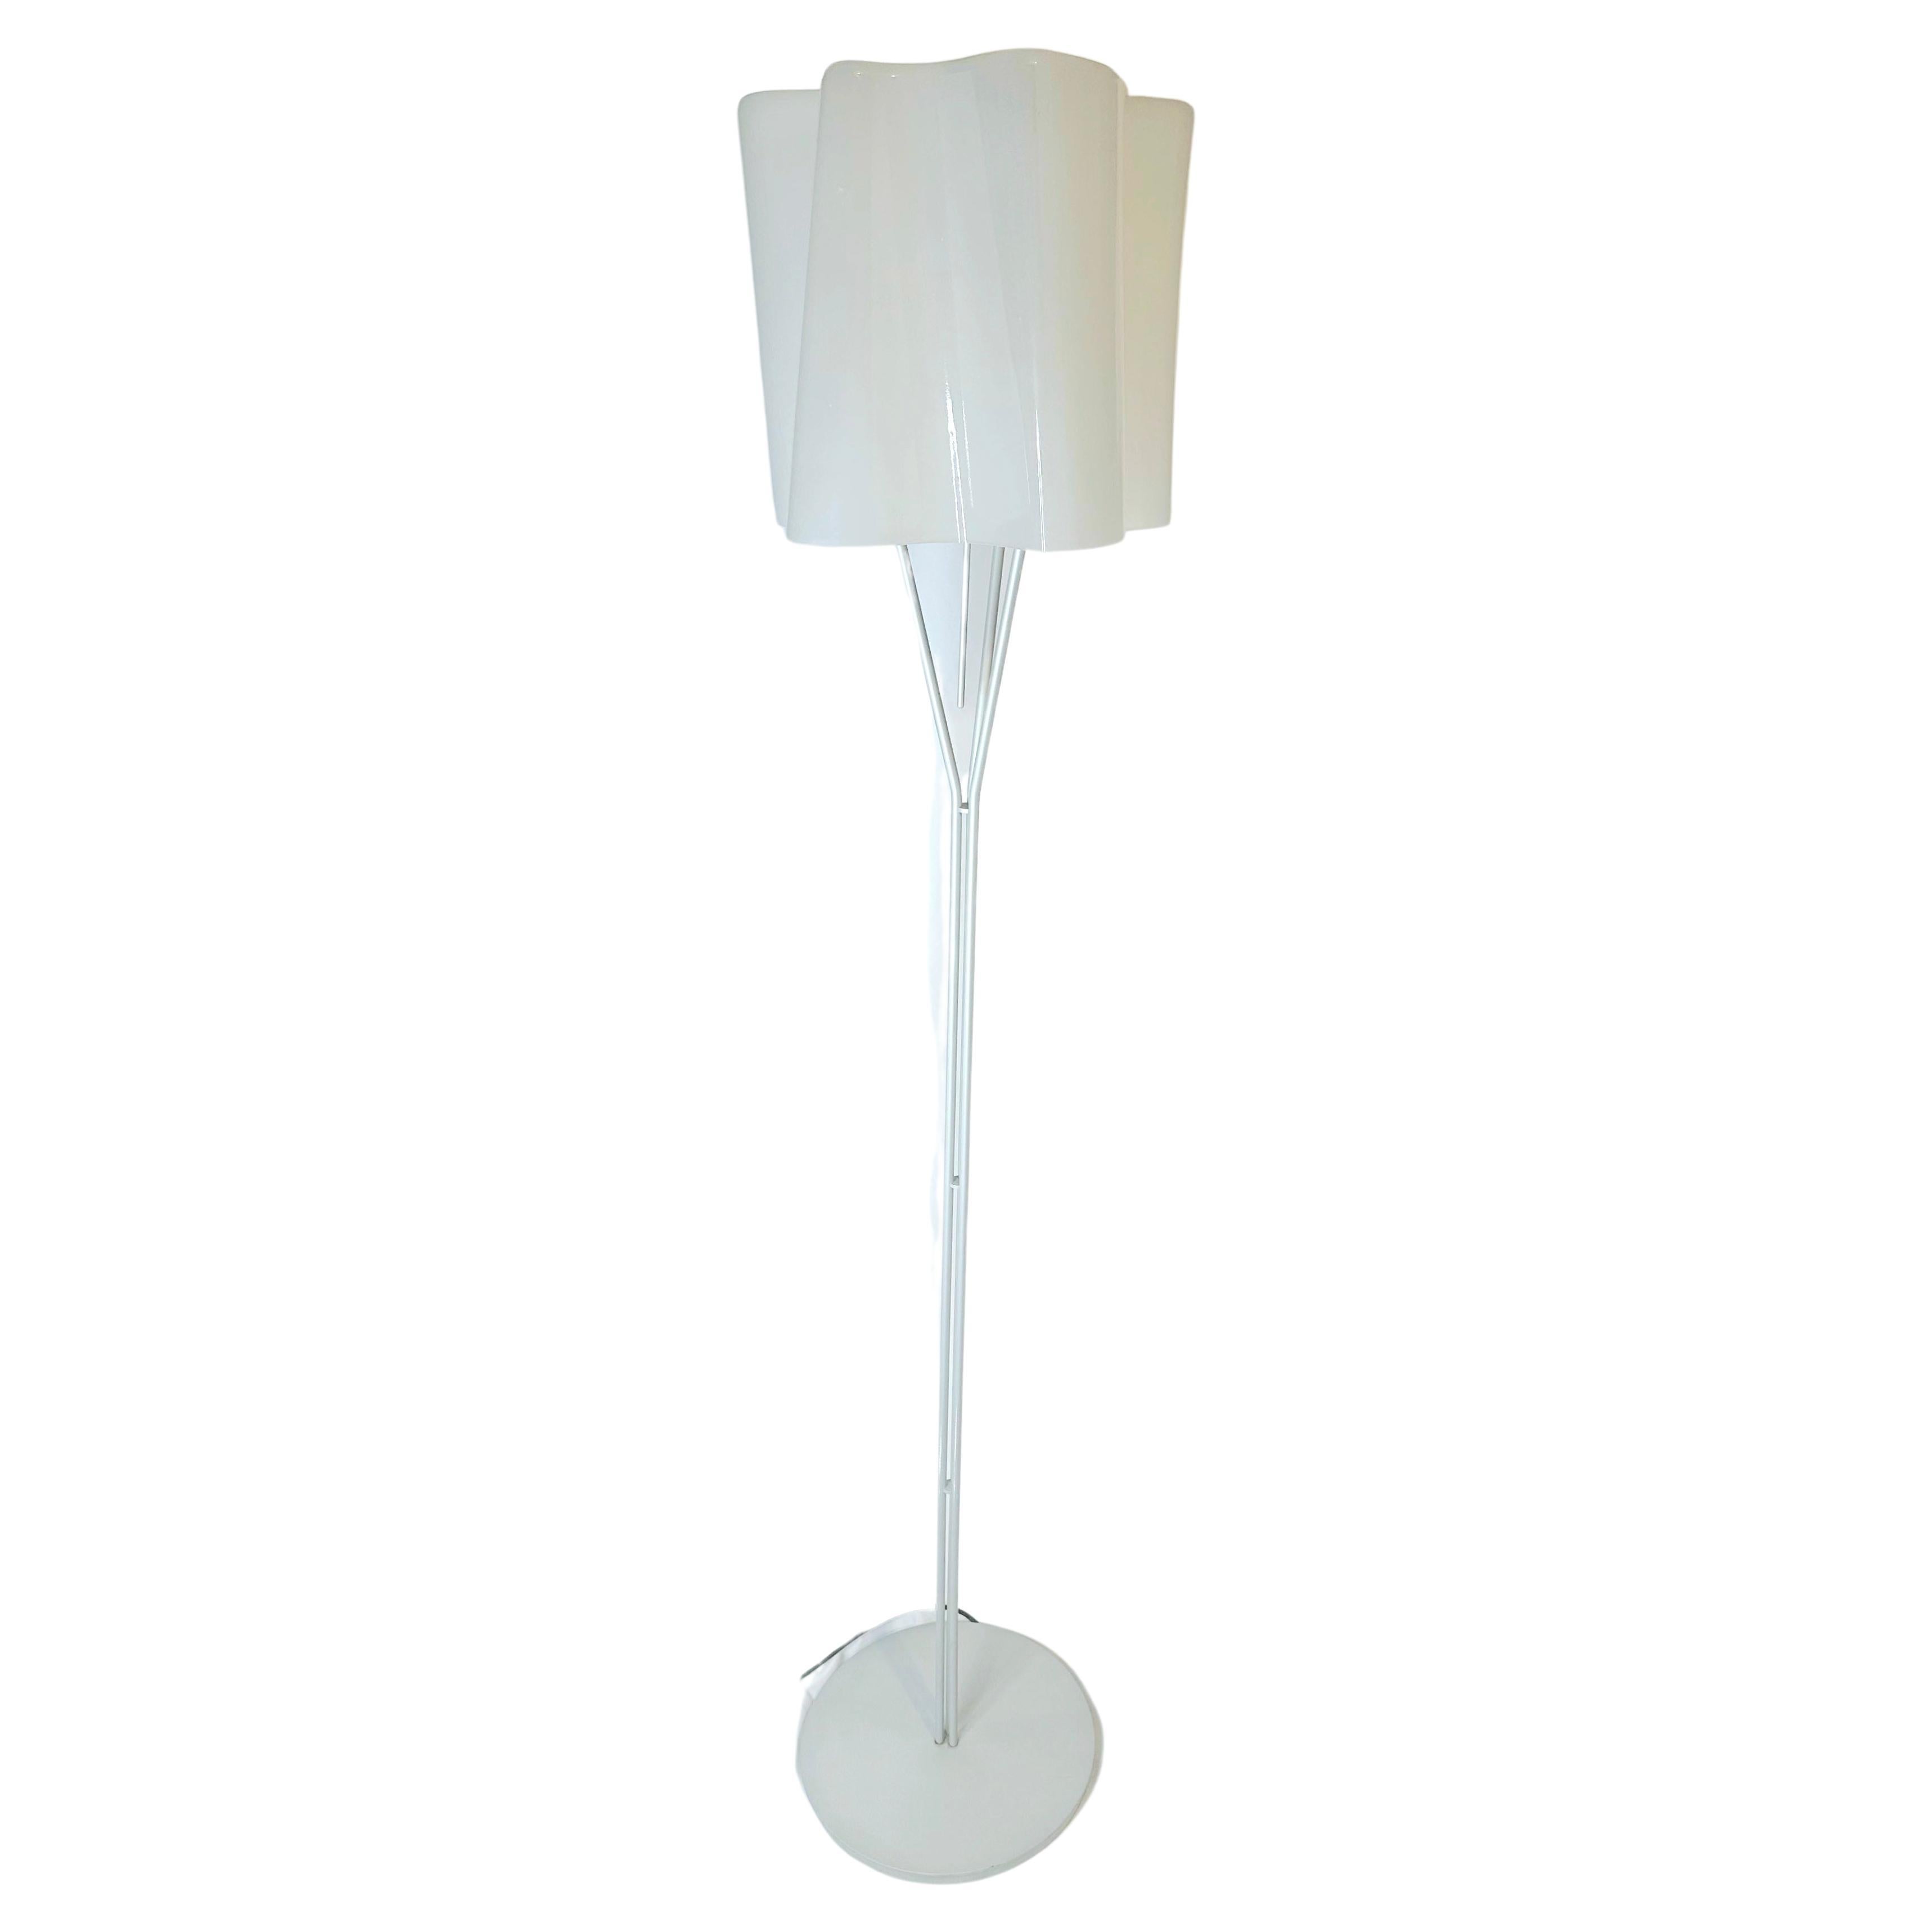 Artemide logico intuitive floor lamp with hand-blown glass  For Sale